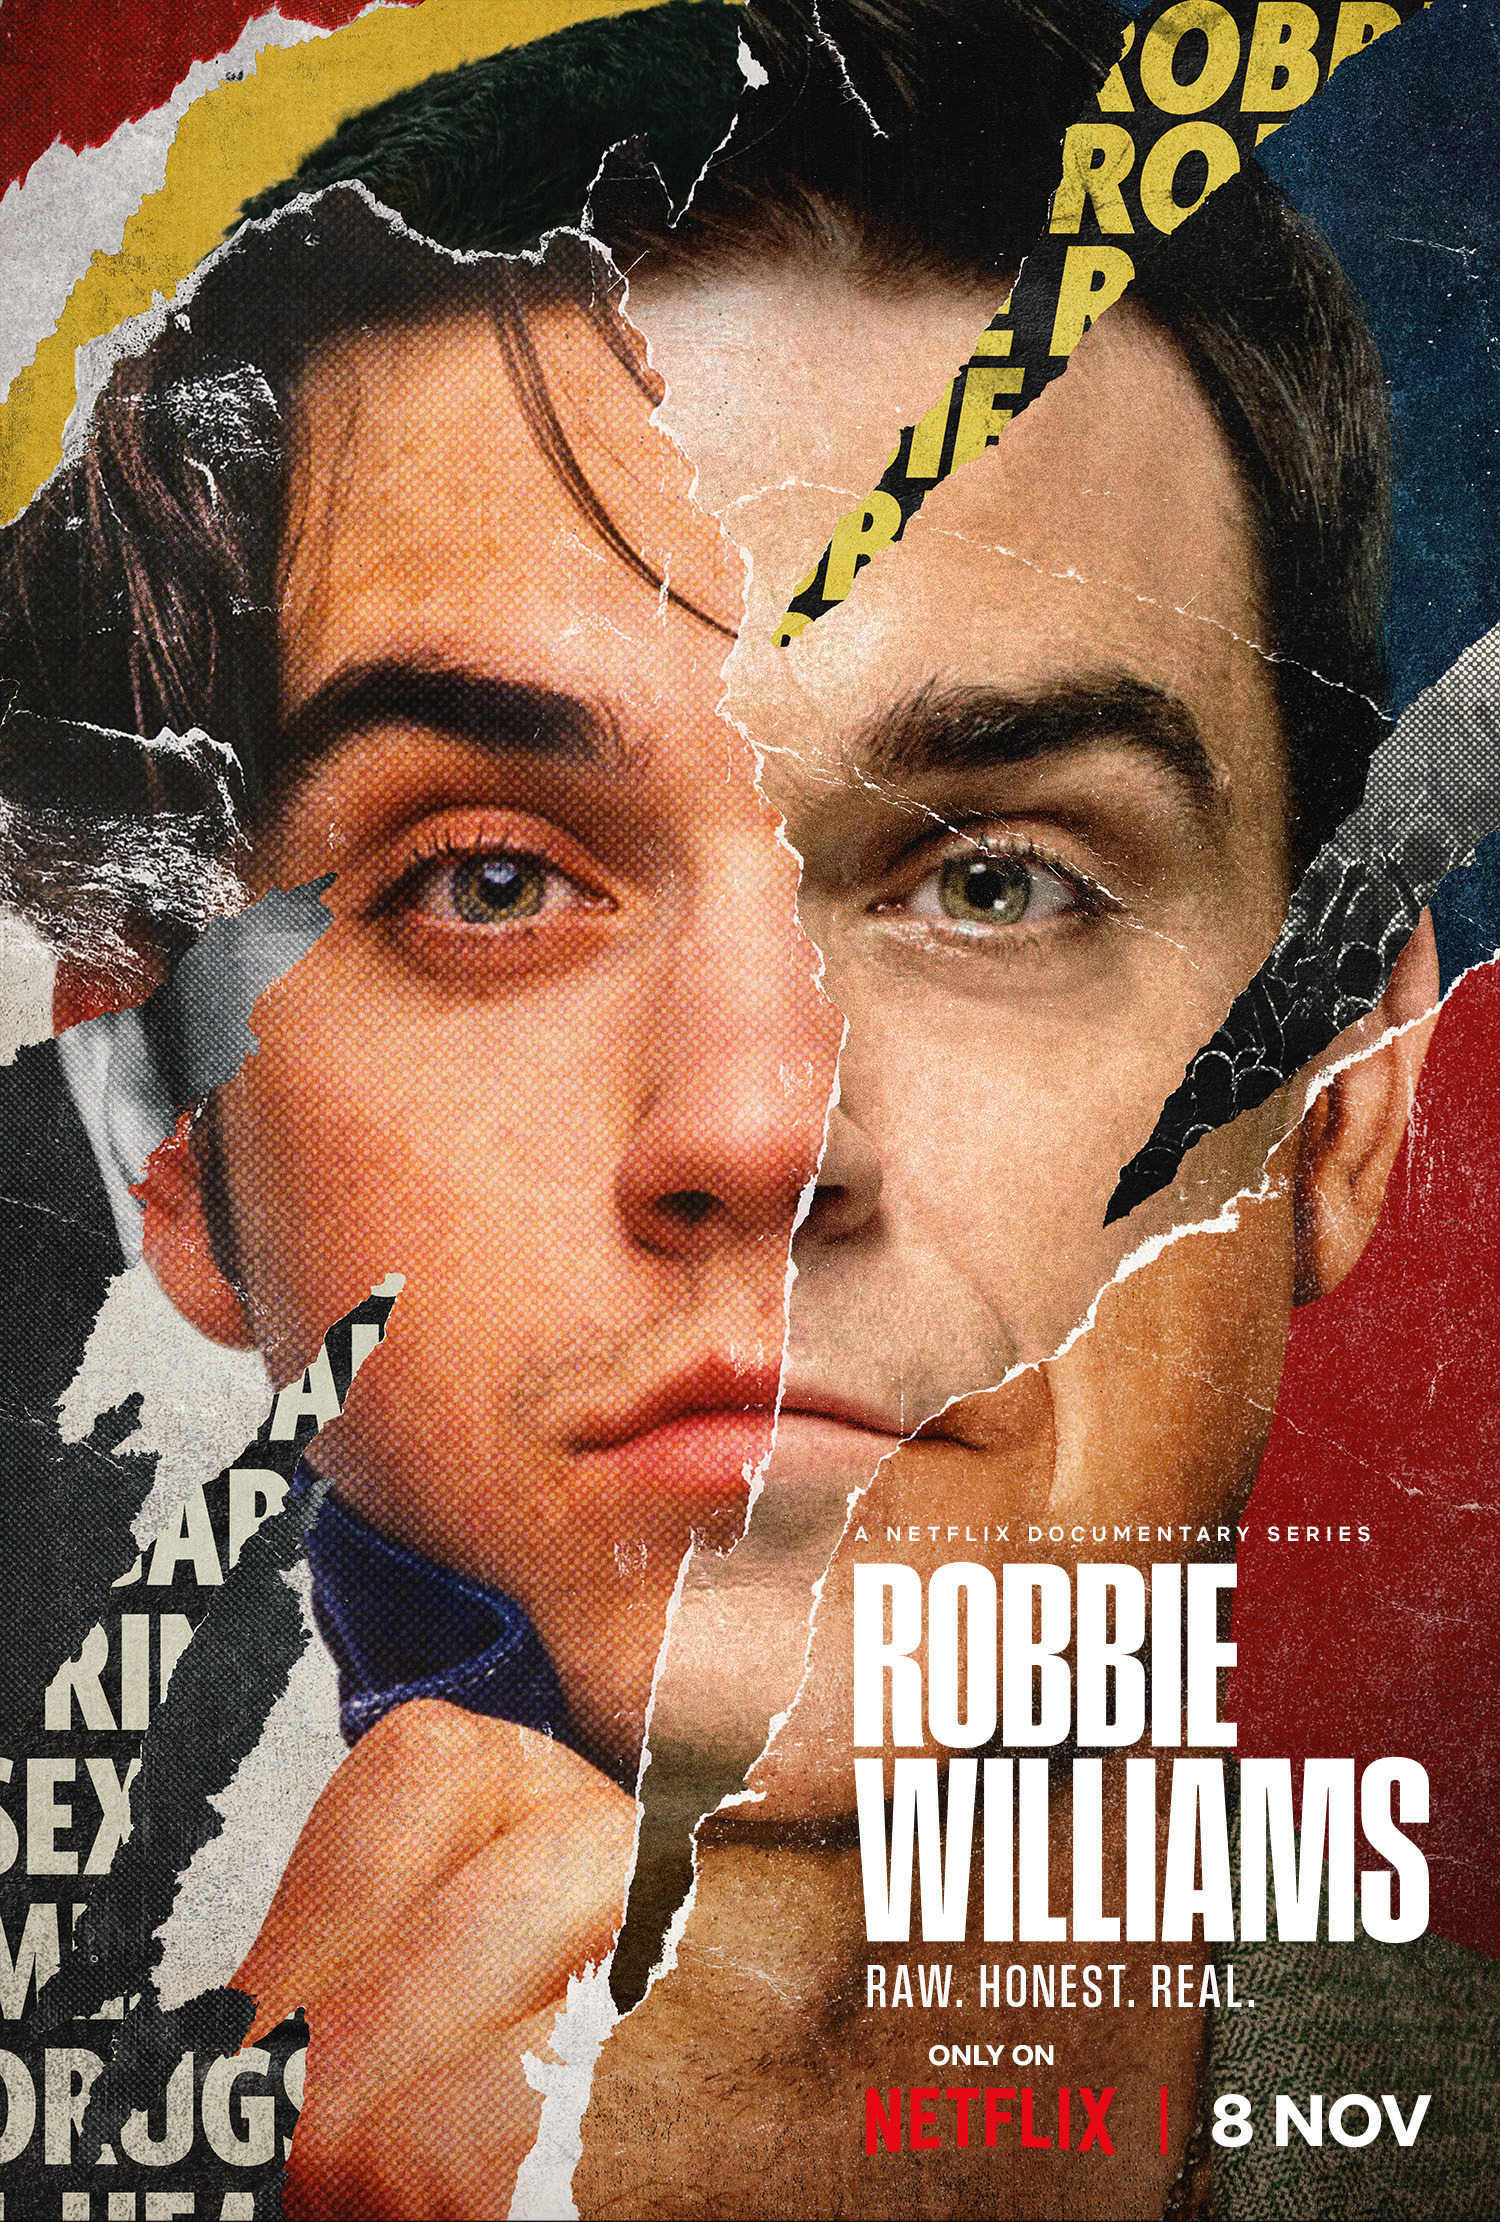 Mega Sized TV Poster Image for Robbie Williams 